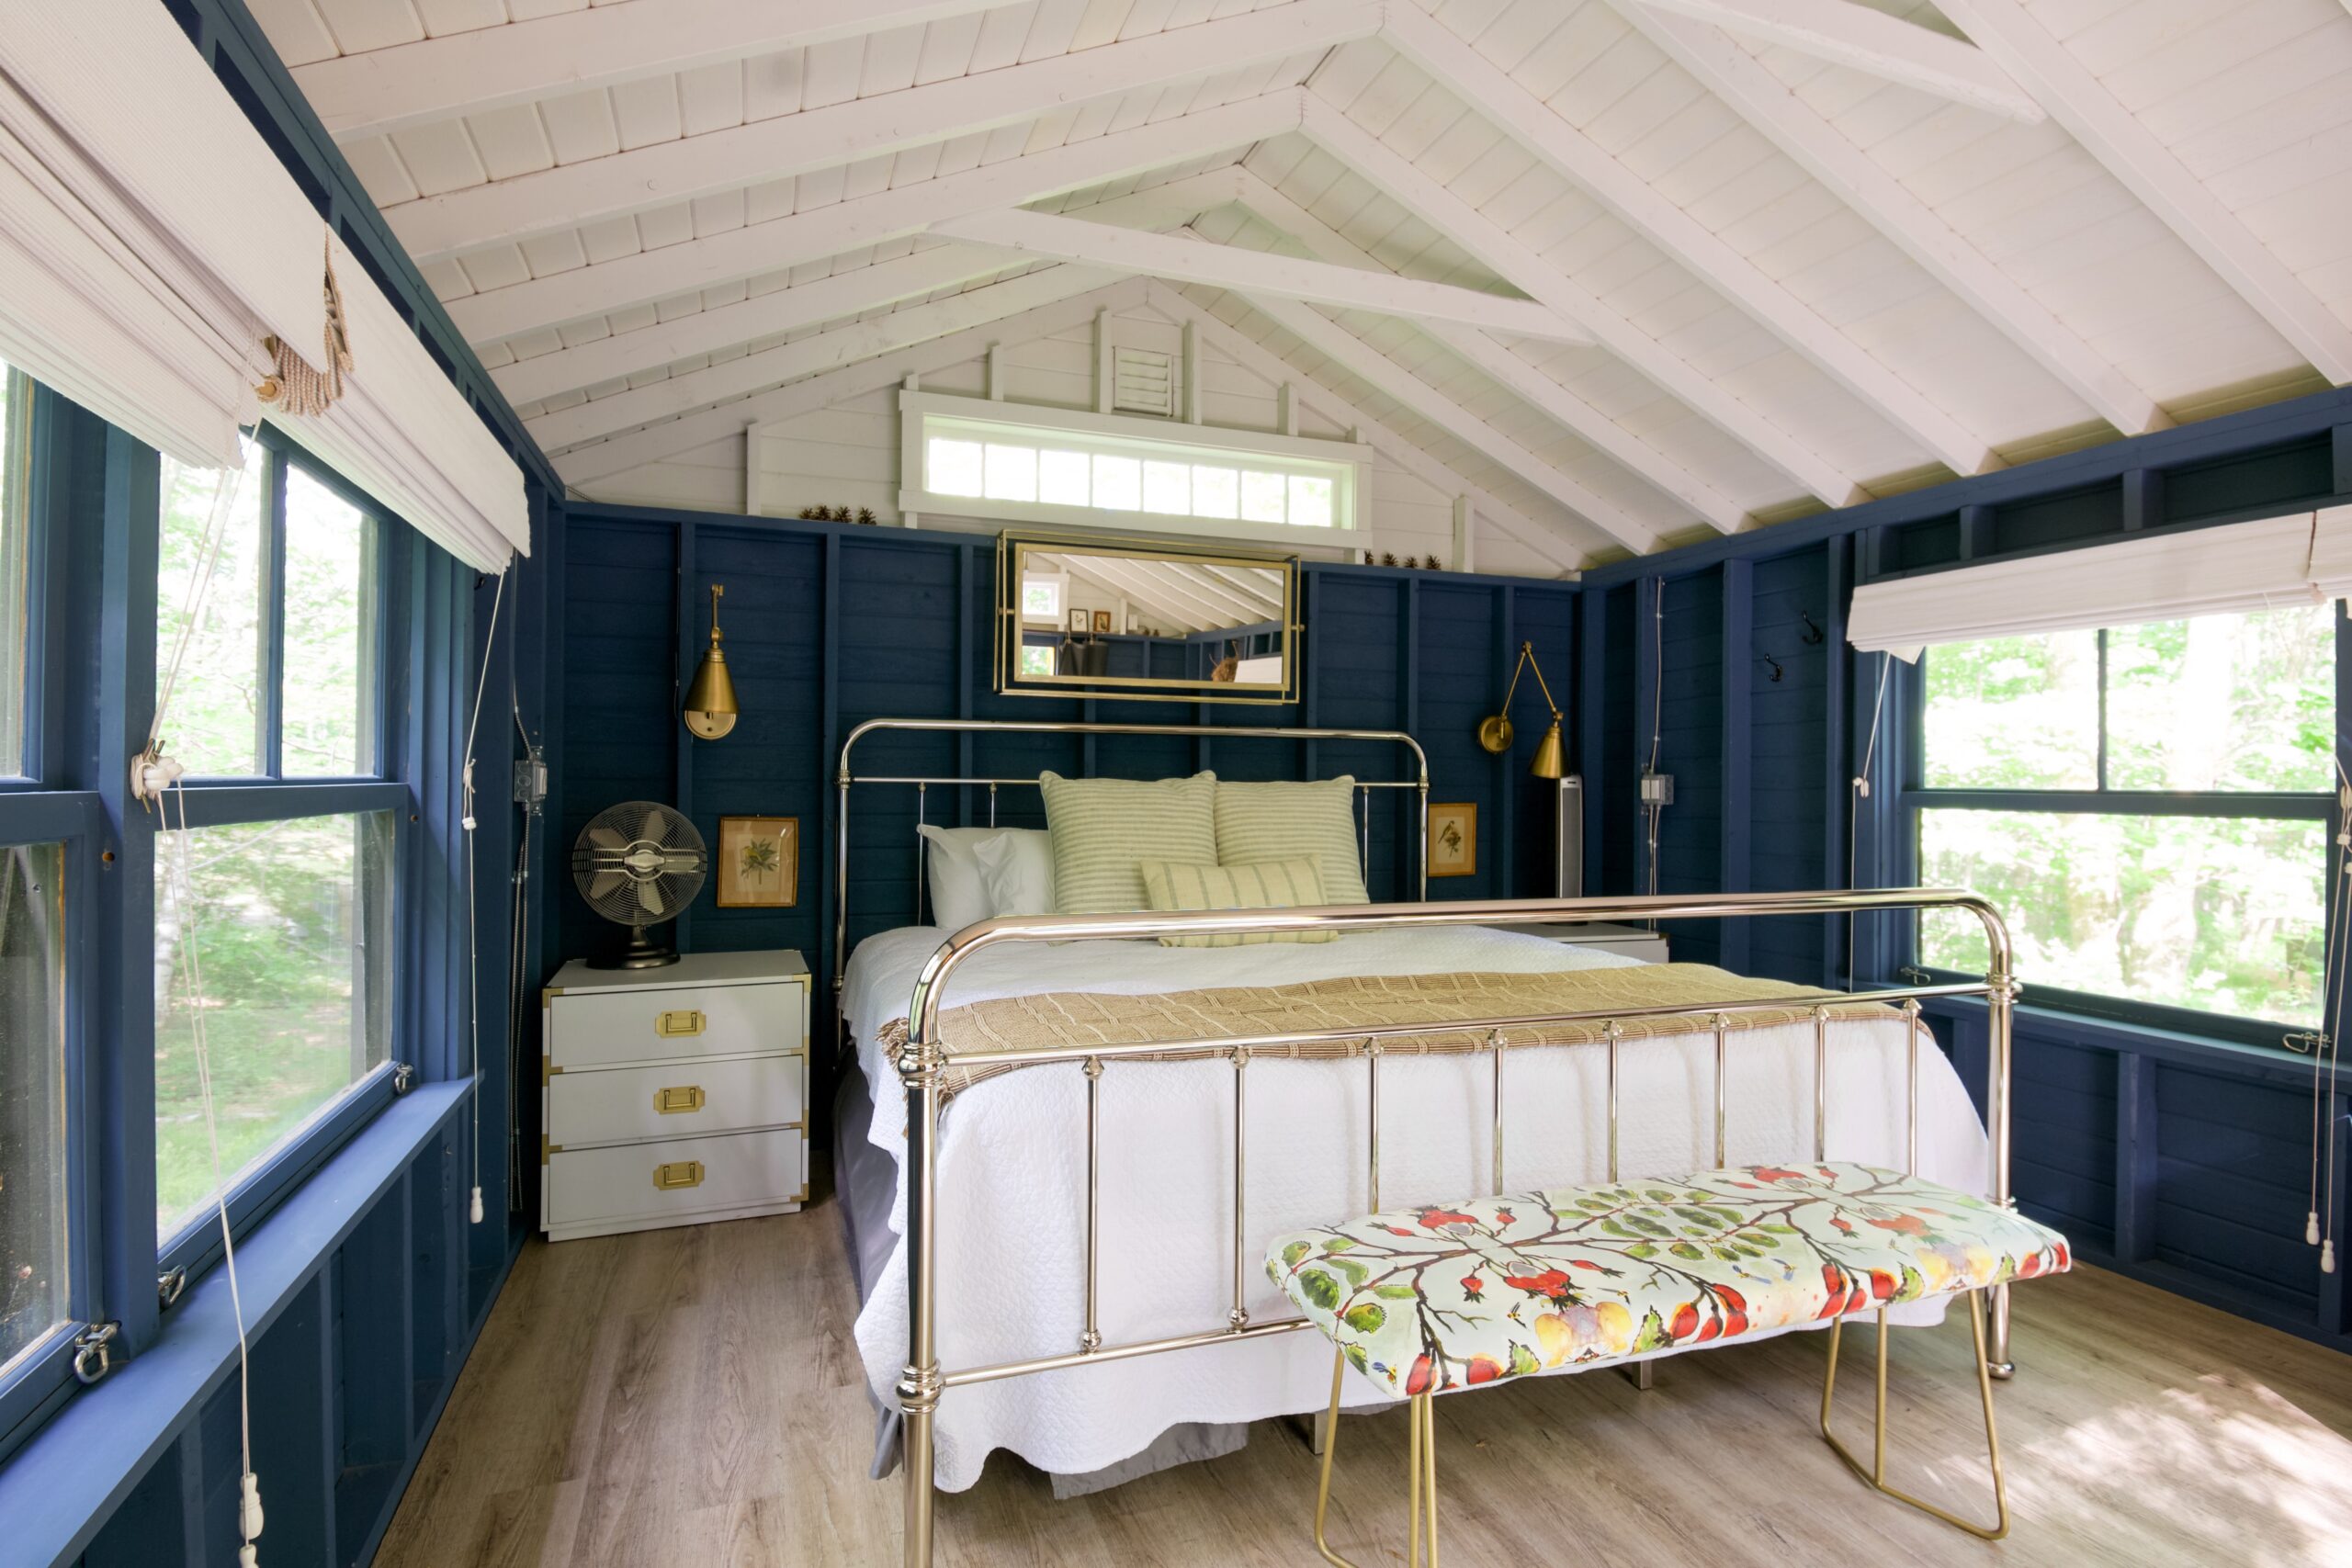 A bedroom in a tiny house